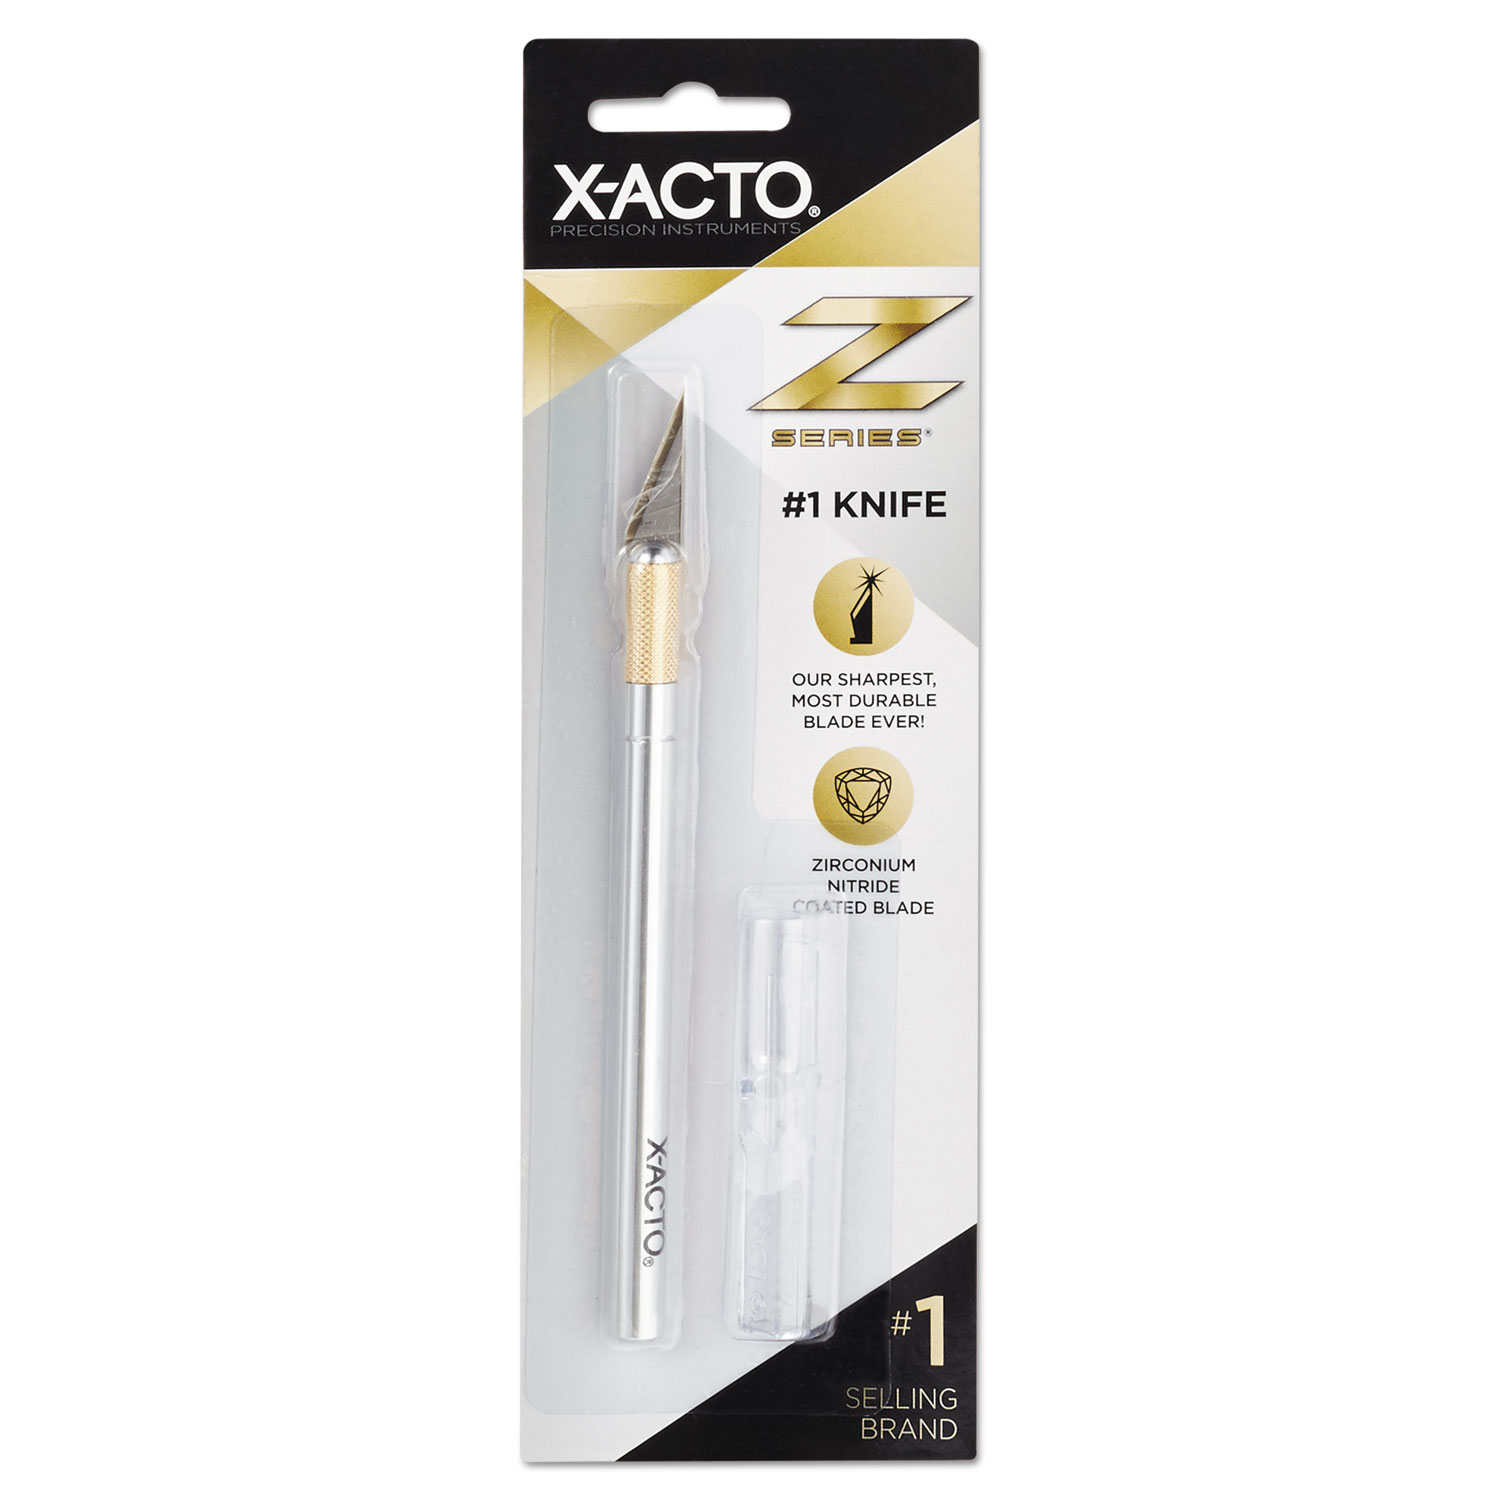 X-ACTO Z Series Light-Weight Precision Knife, No 11, 4-7/8 in L, Stainless Steel Blade, Aluminum Handle, Silver, Gold Hue - image 4 of 5